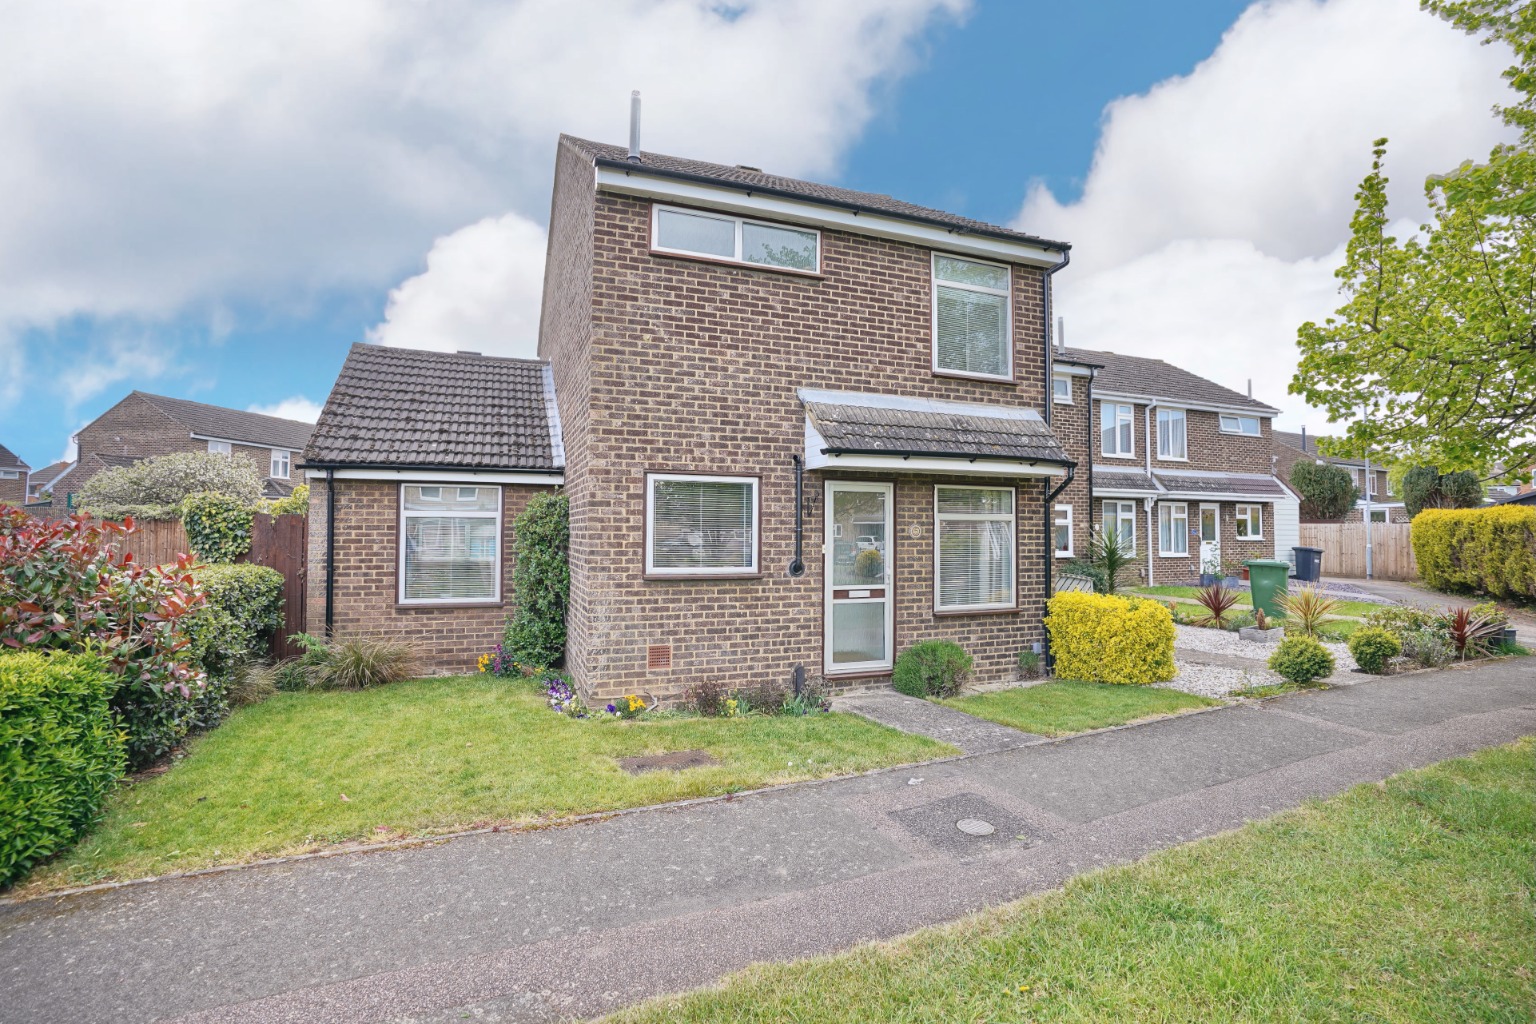 This well presented staggered end of terrace home set in a popular cul-de-sac in Eaton Ford